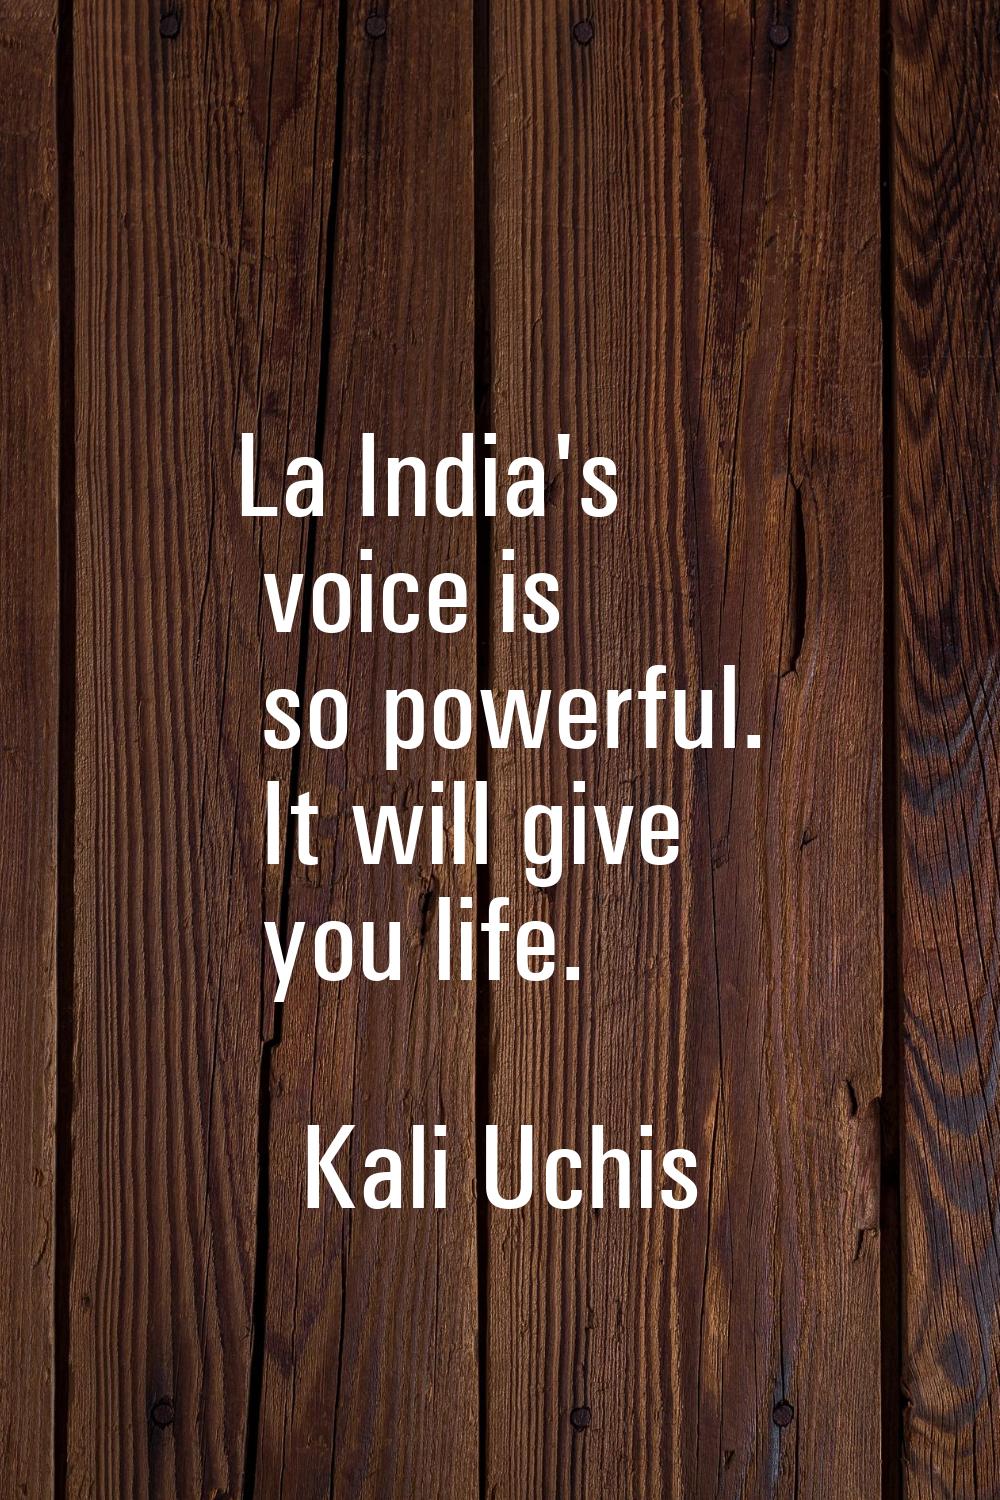 La India's voice is so powerful. It will give you life.